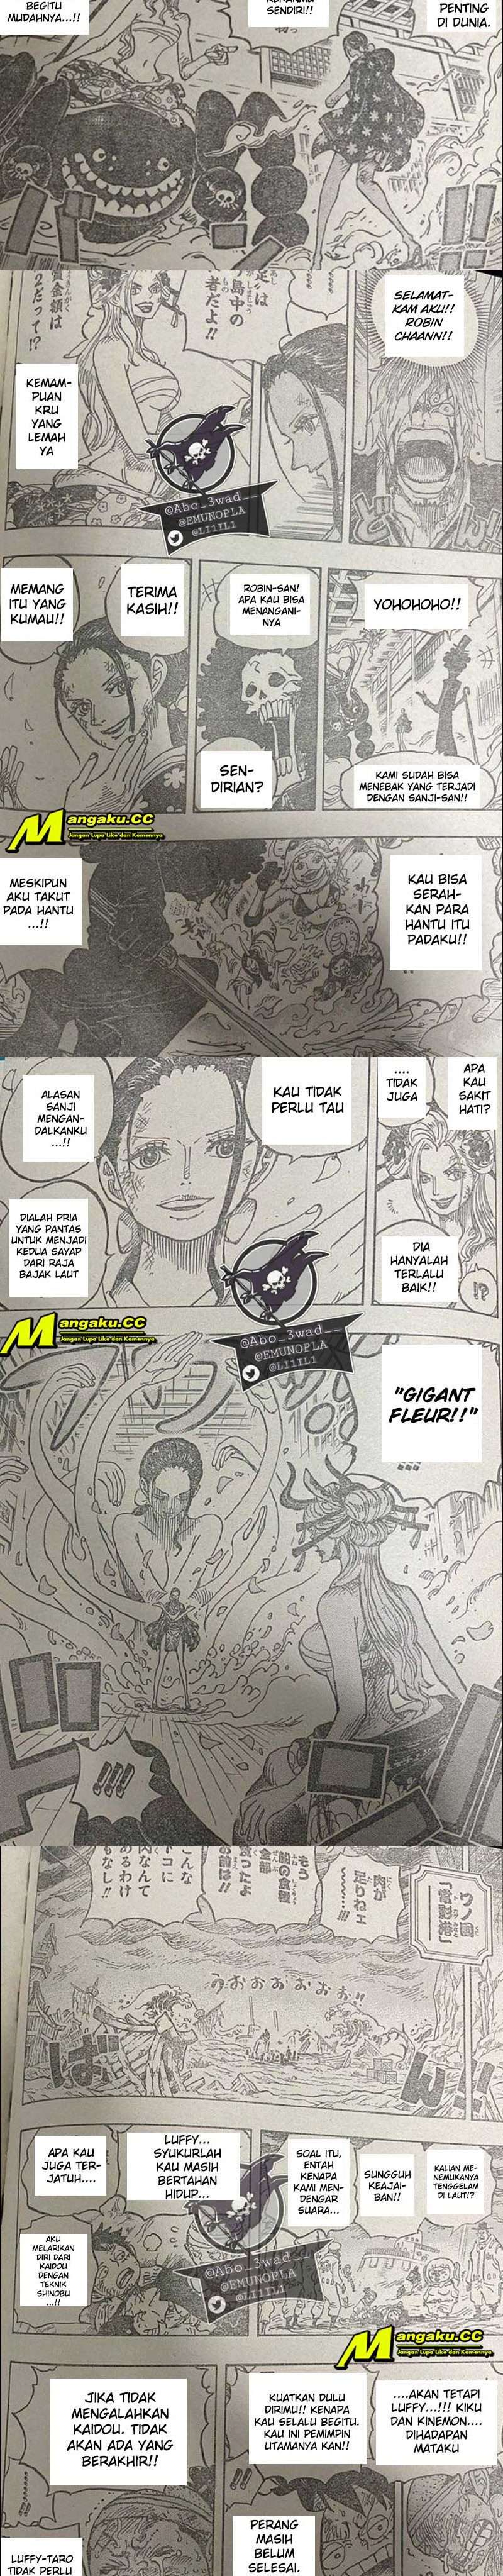 One Piece Chapter 1020 Lq - 45